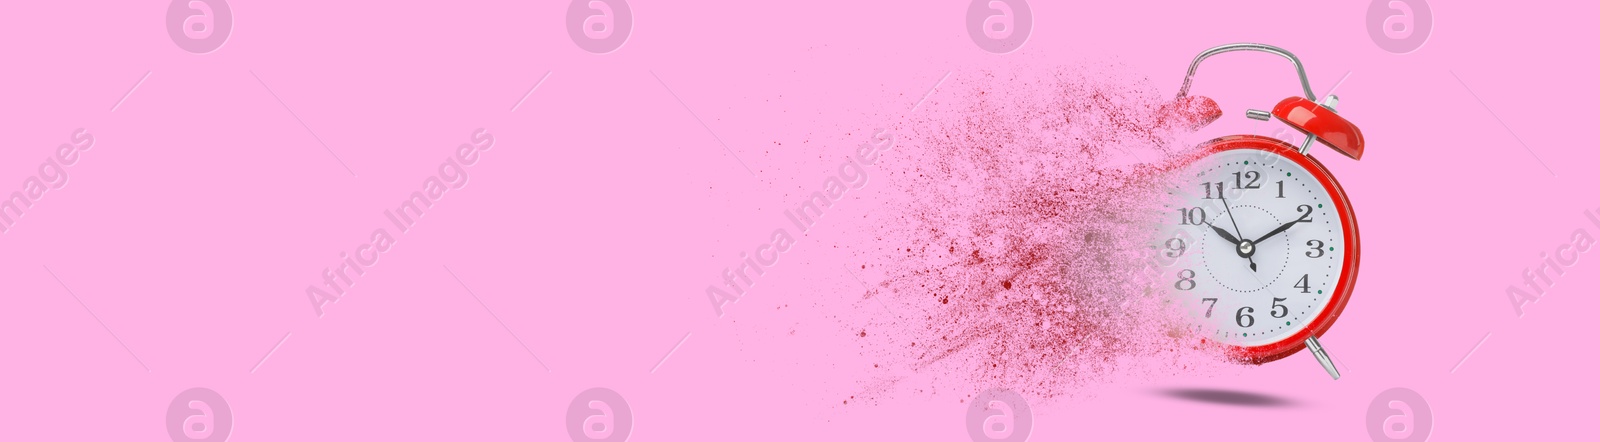 Image of Red alarm clock dissolving on pink background, banner design with space for text. Flow of time